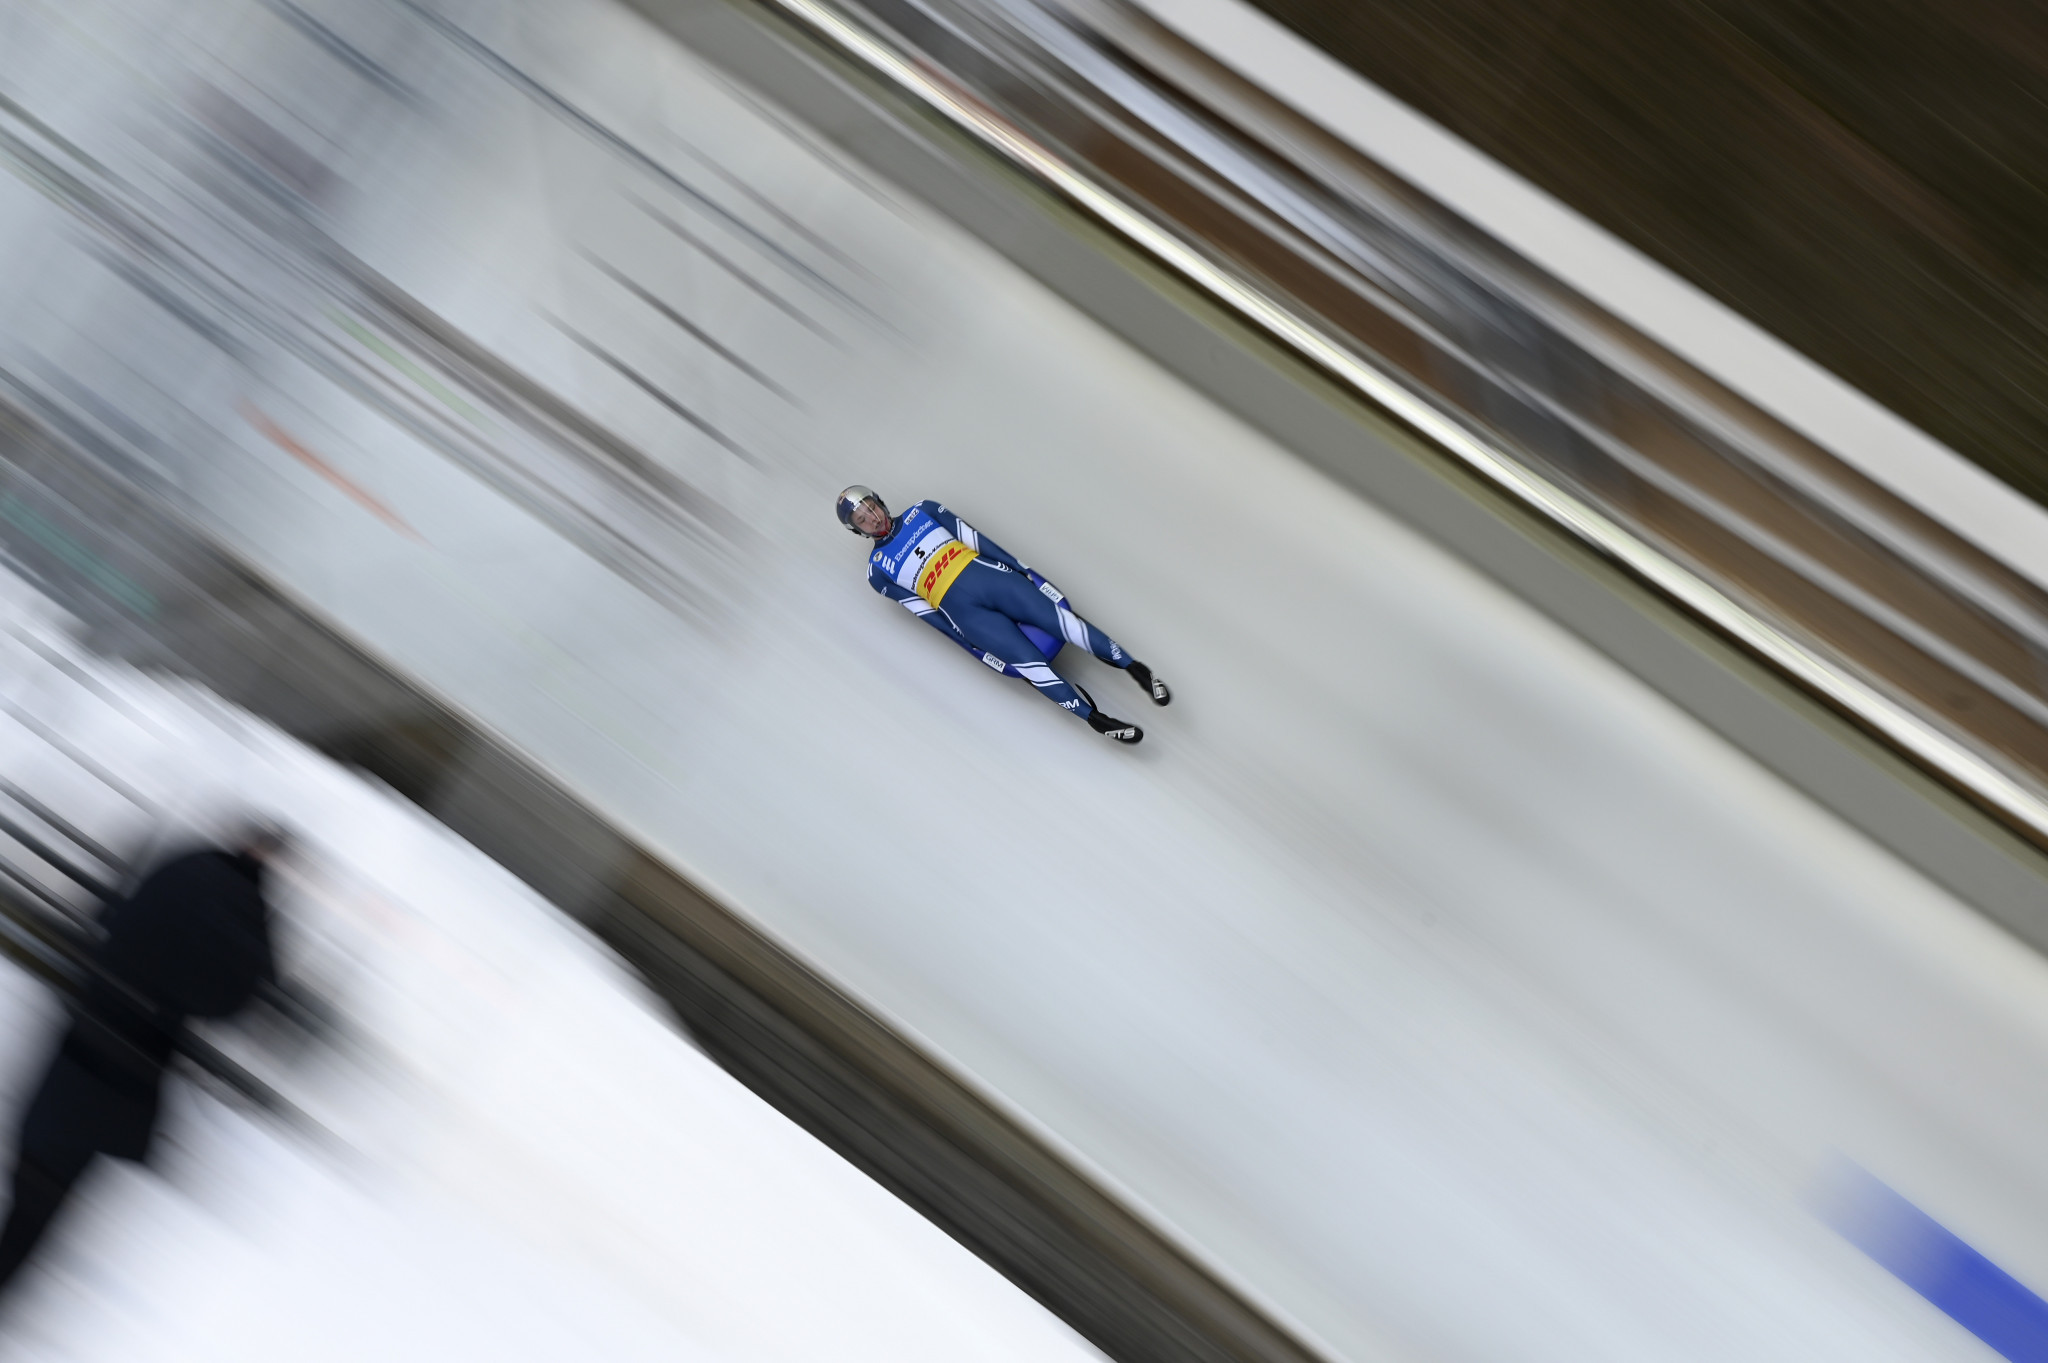 Russian Luge Federation claims athletes awaiting prize money from previous season